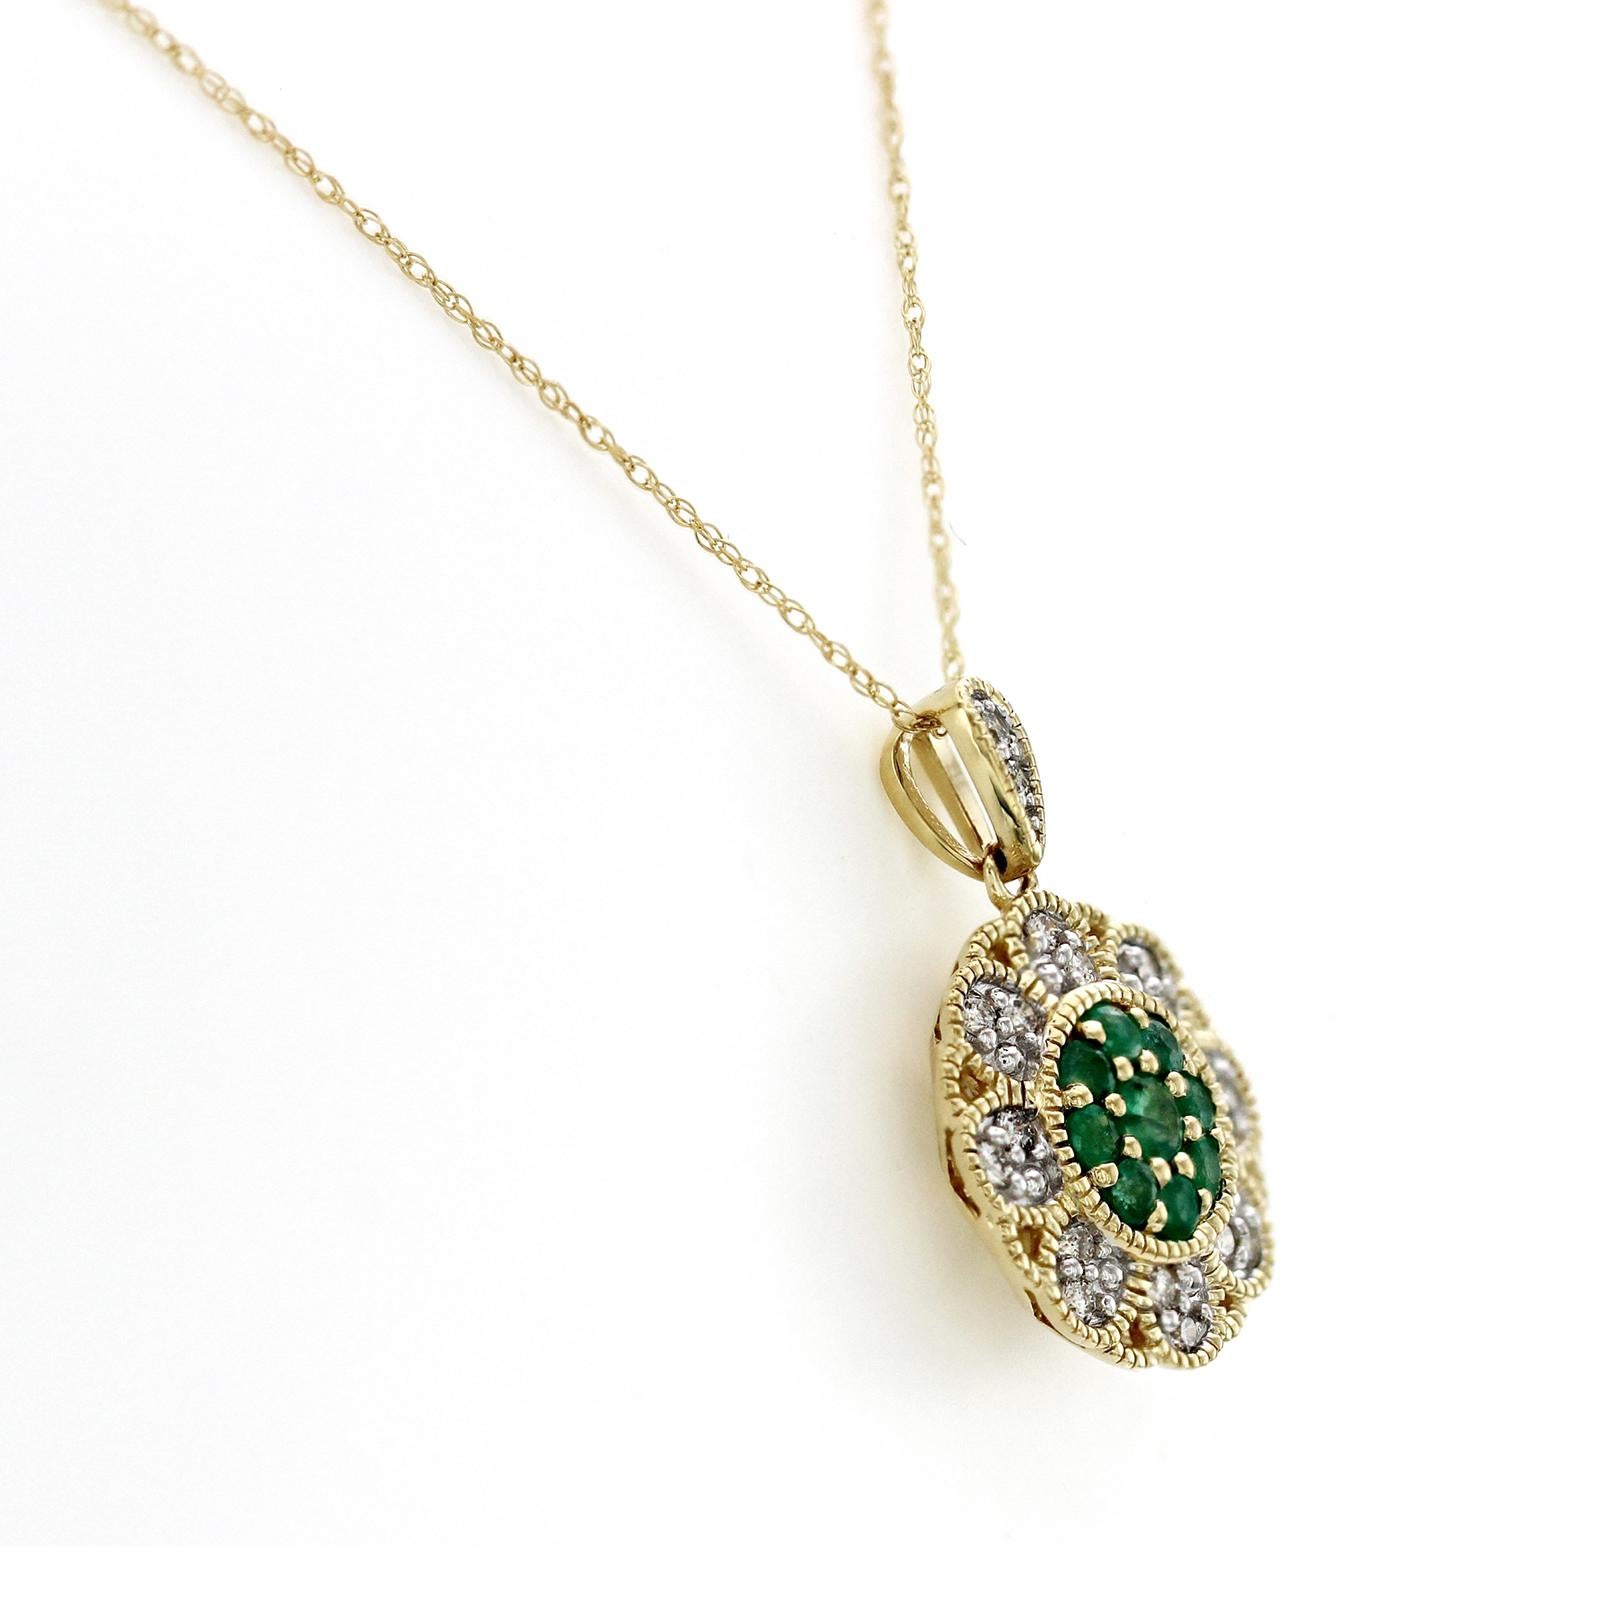 100% Authentic, 100% Customer Satisfaction

Pendant: 21 mm

Chain: 0.03 mm

Size:18 Inches

Metal: 14K Yellow Gold

Hallmarks: 14K

Total Weight: 3.2 Grams

Stone Type: 0.45 CT Natural Emerald &  Diamond 0.27 CT  G   SI1

Condition: New With Tag